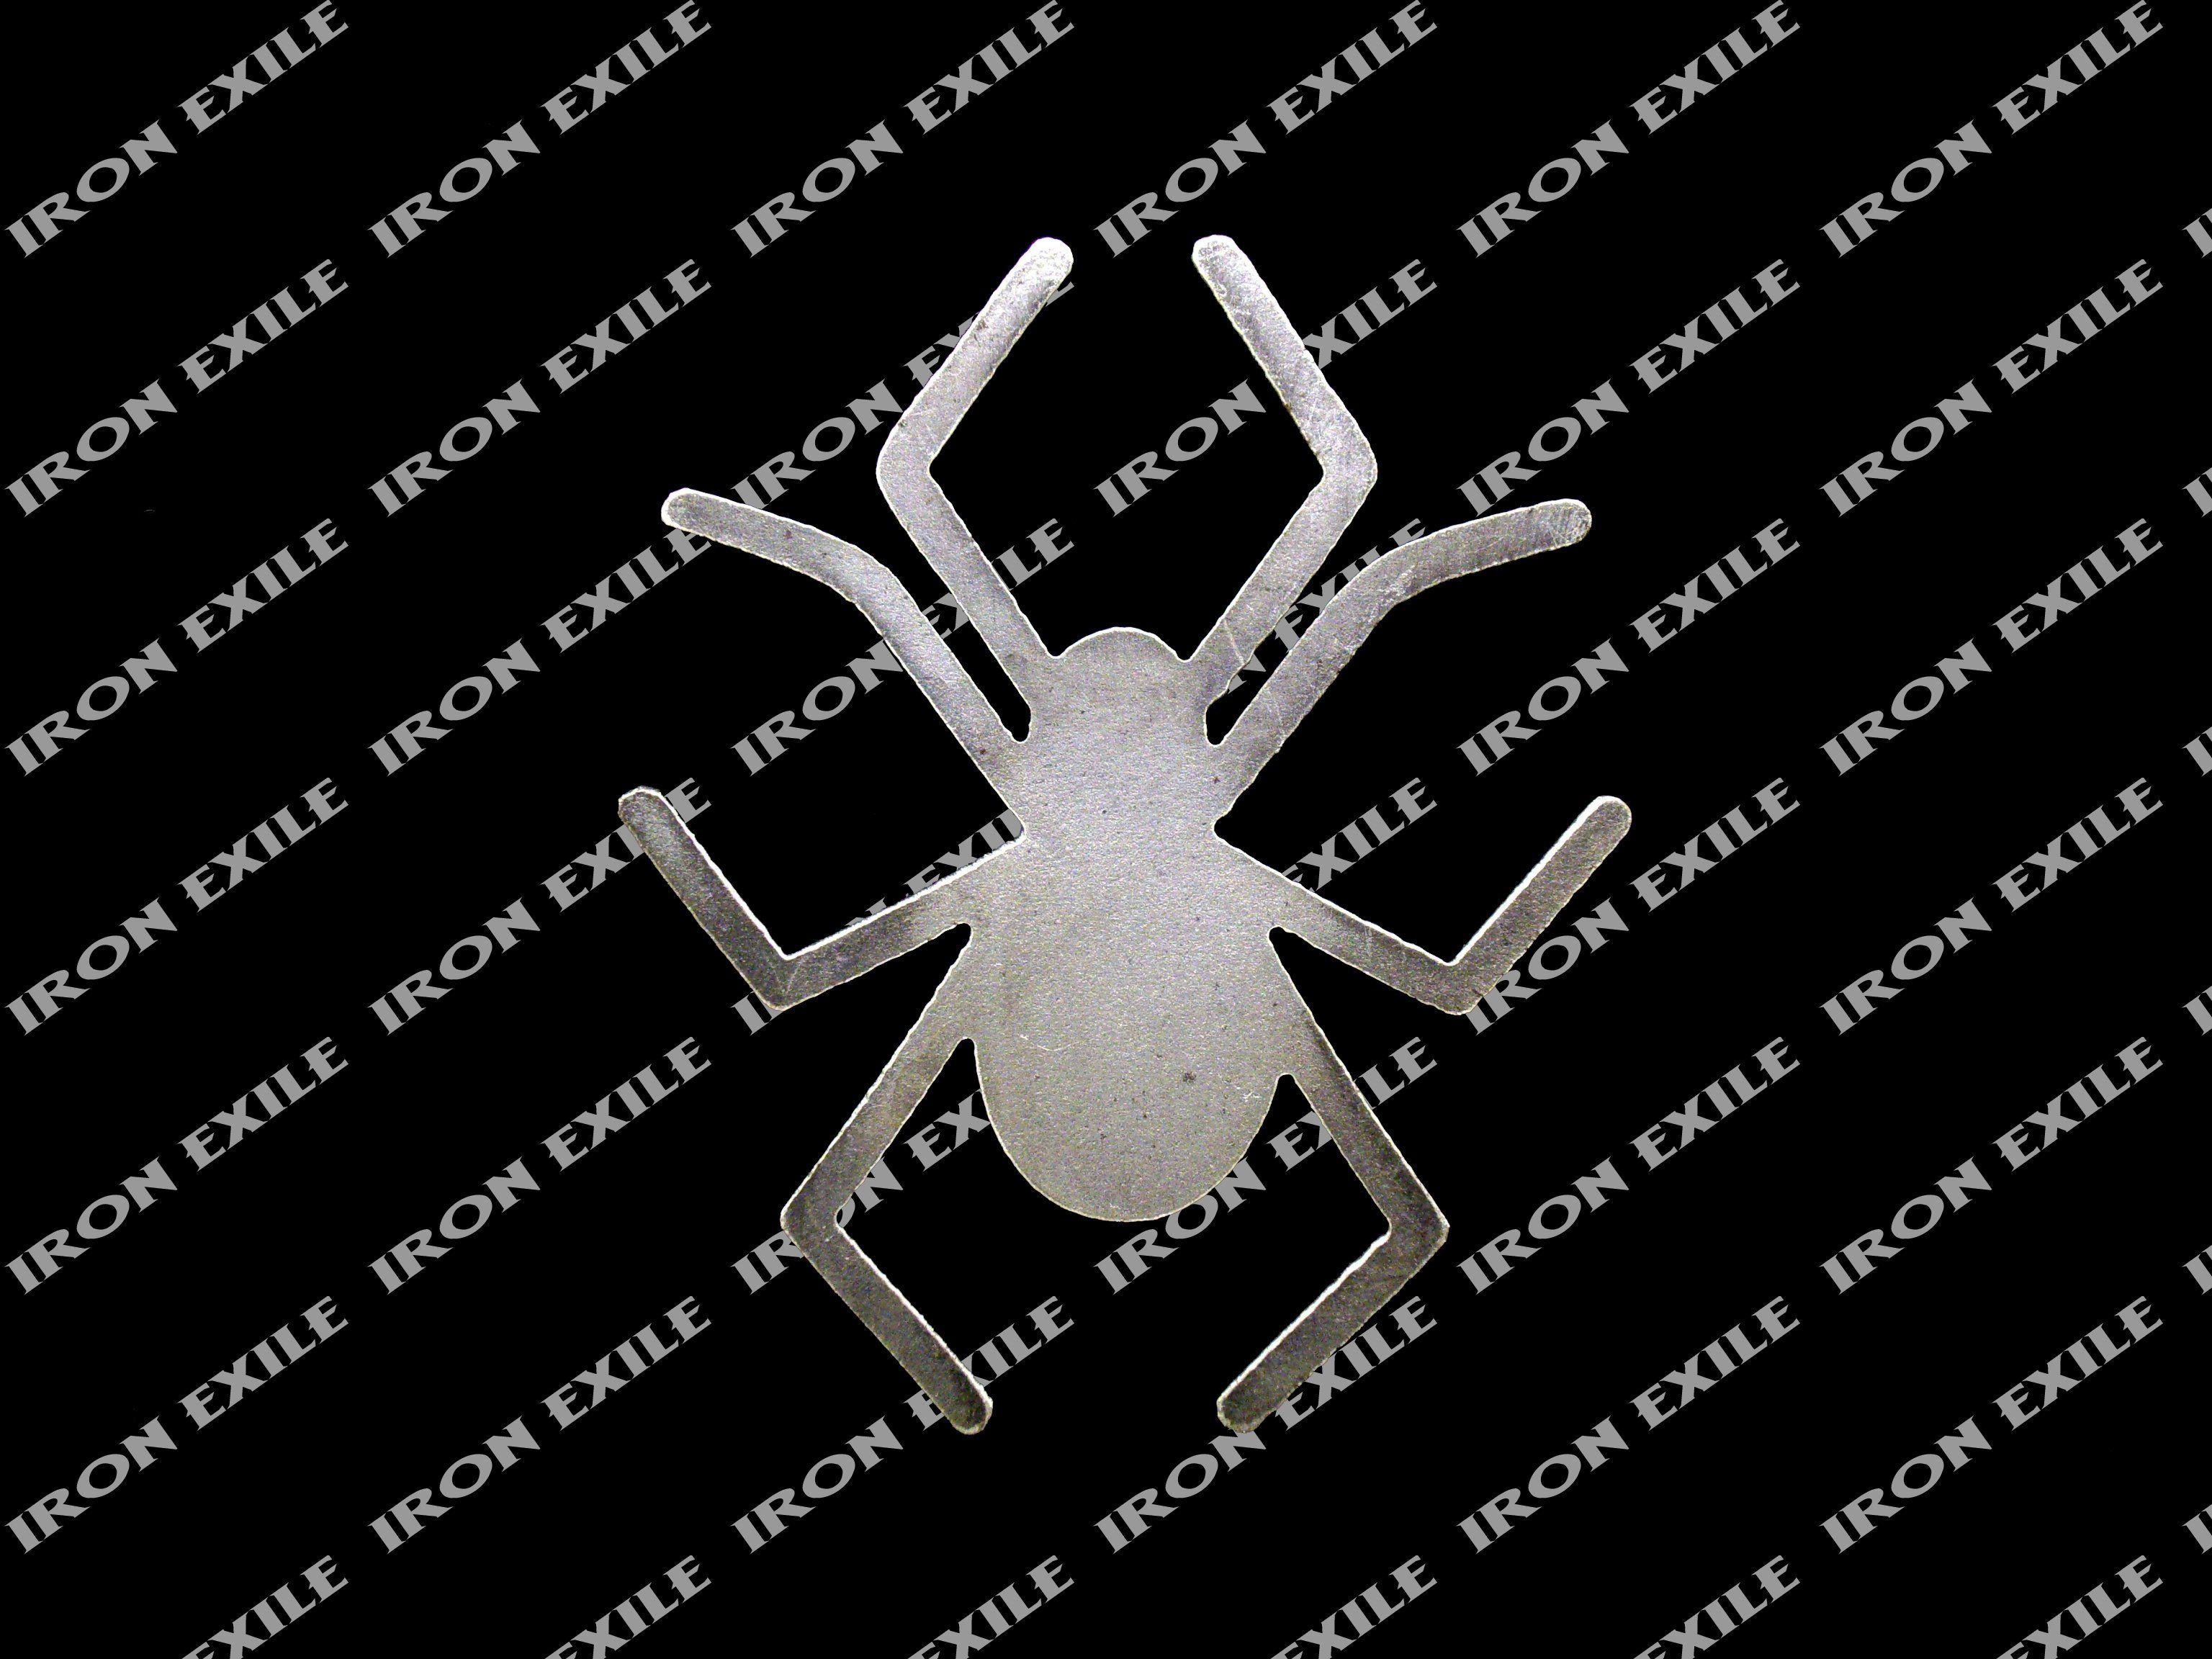 Spider -Man 3 Logo - Details about Metal Spider Paint Stencil for Halloween Decor Decorations or Hot Rat Rod USA